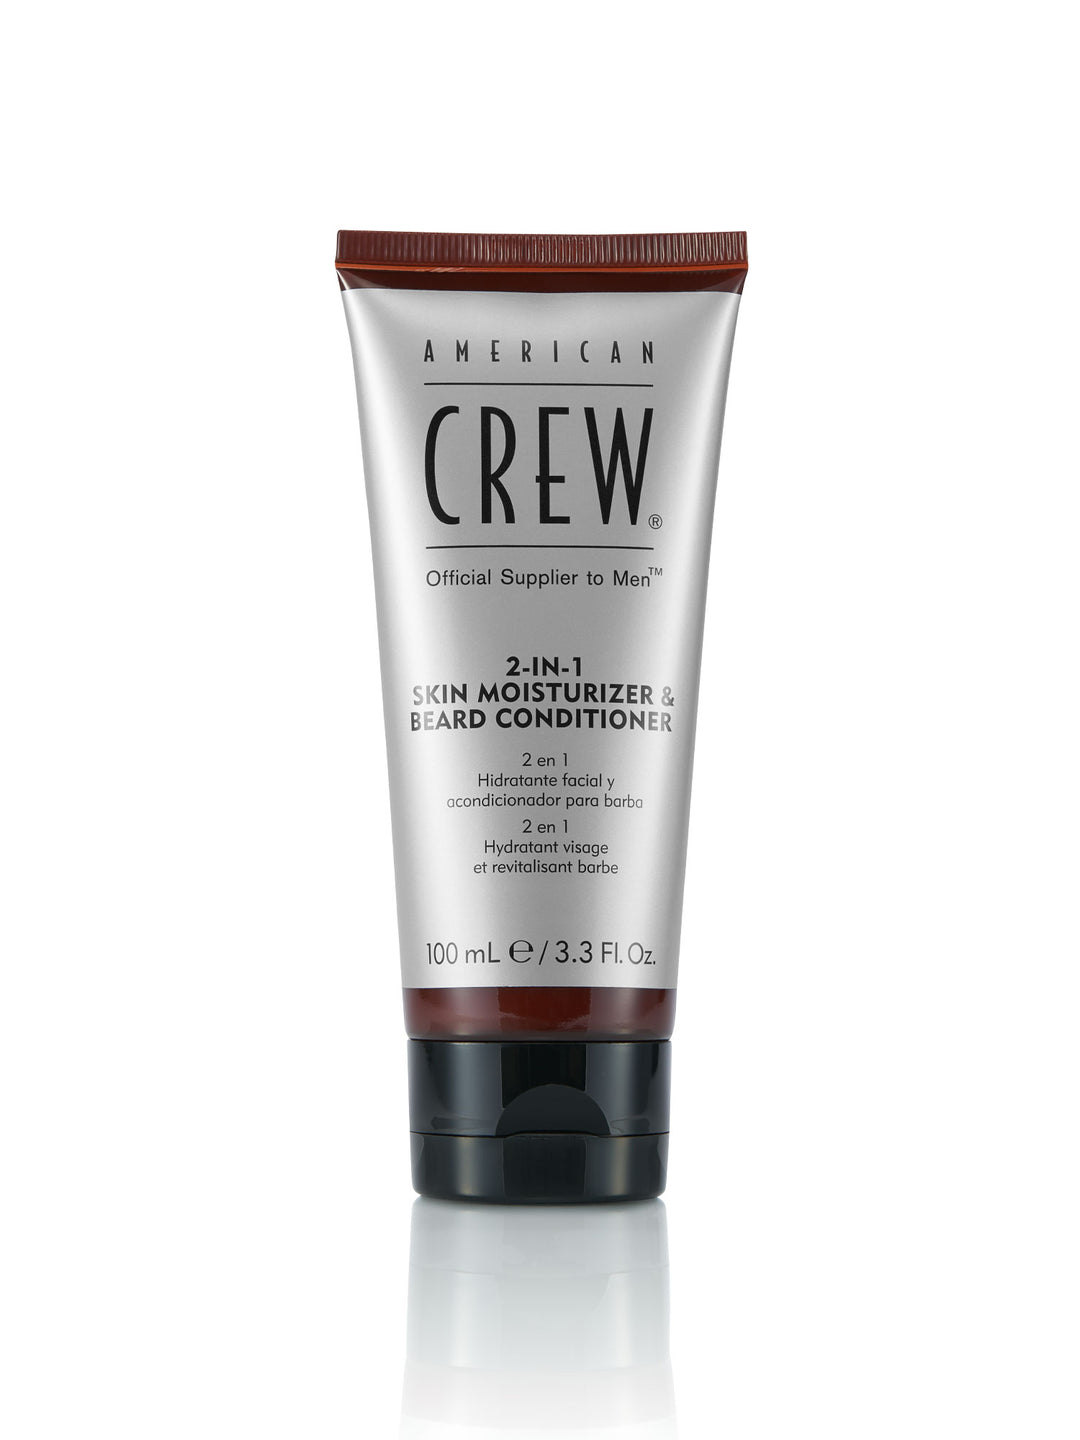 American Crew 2-in-1 Moisturizer and Beard Conditioner